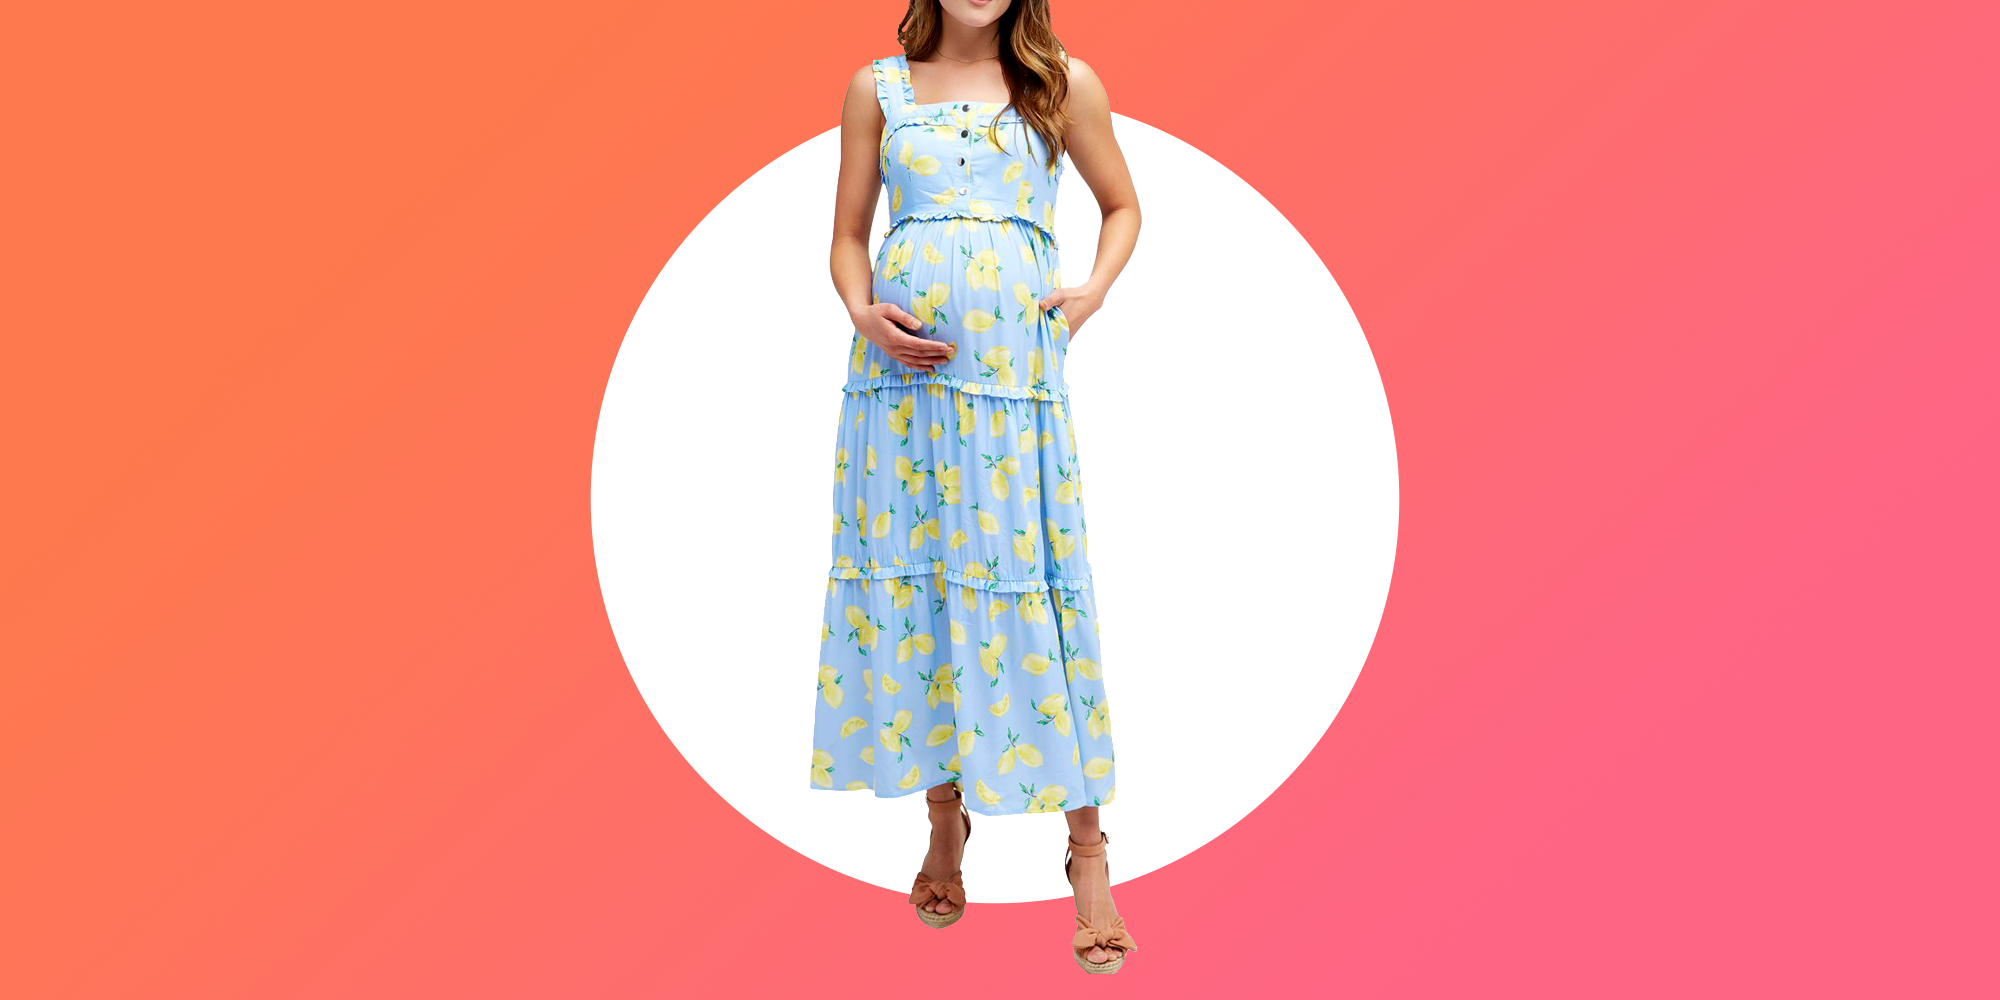 Fashion Women's Comfortable Dresses Casual Daily Wear Pregnant Maternity Dress